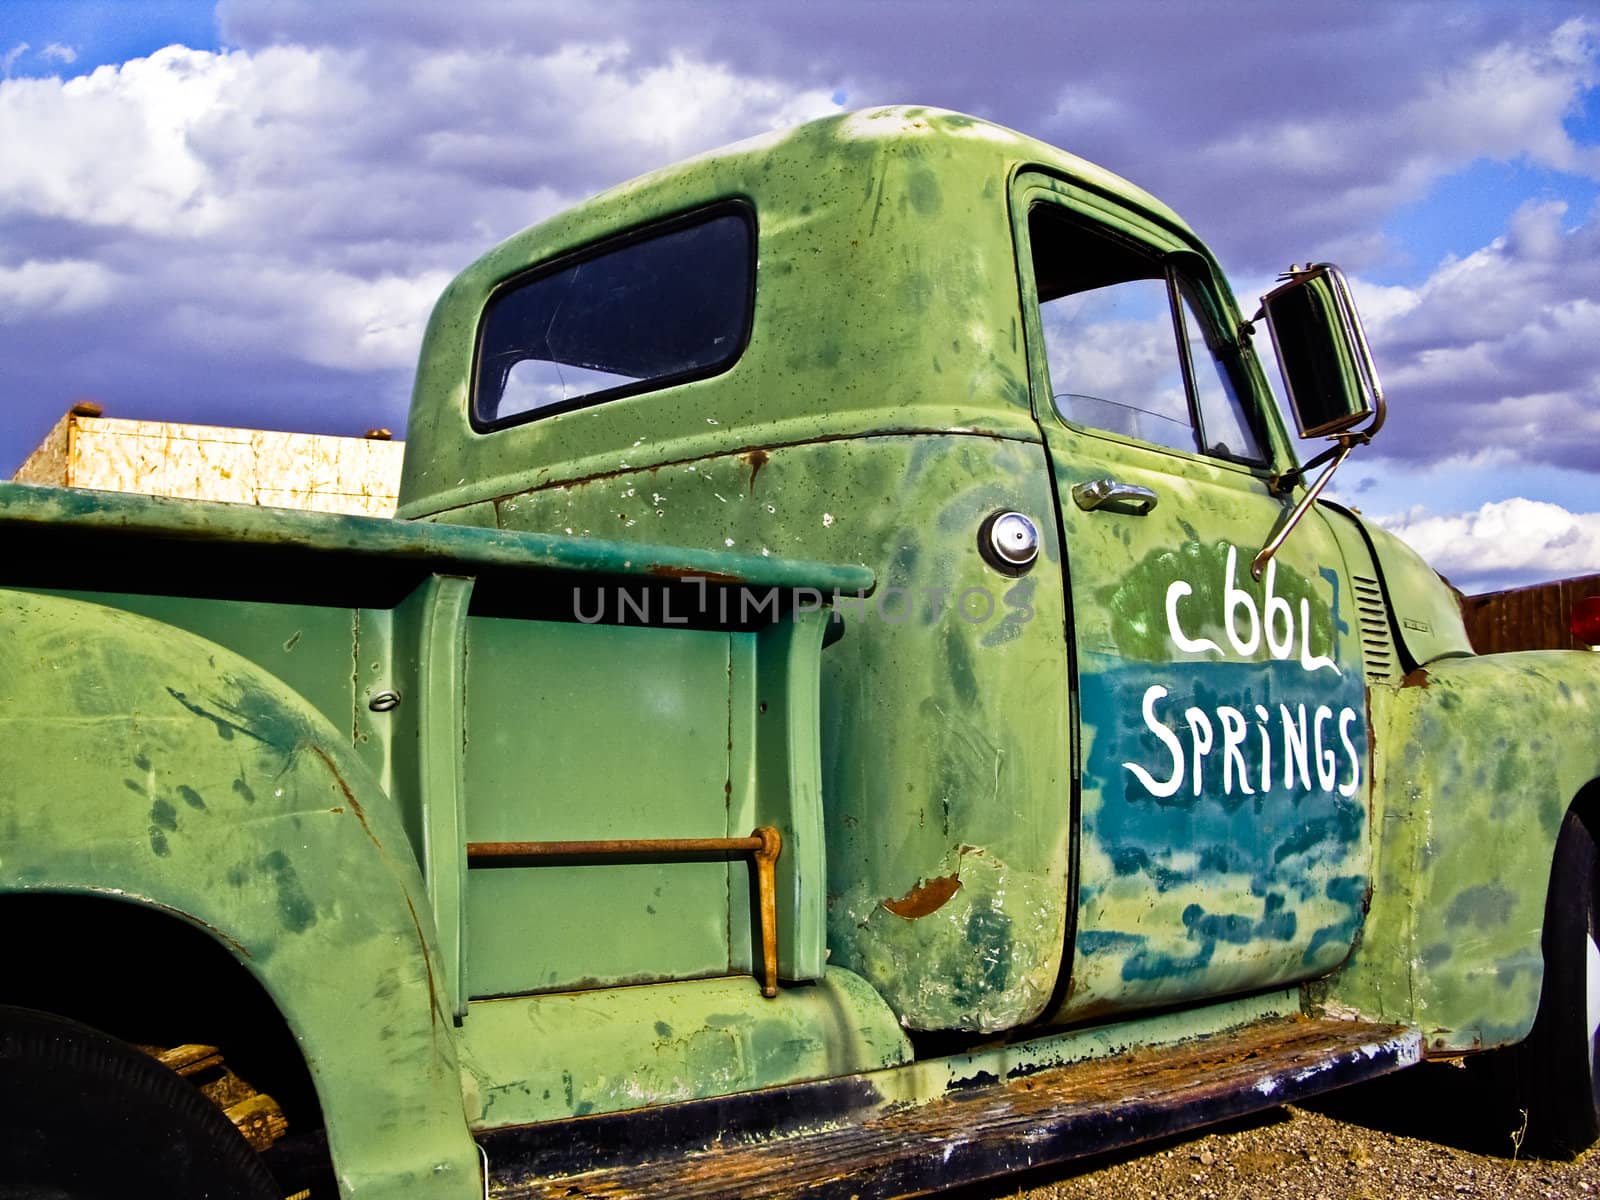 Cool Springs Truck by emattil